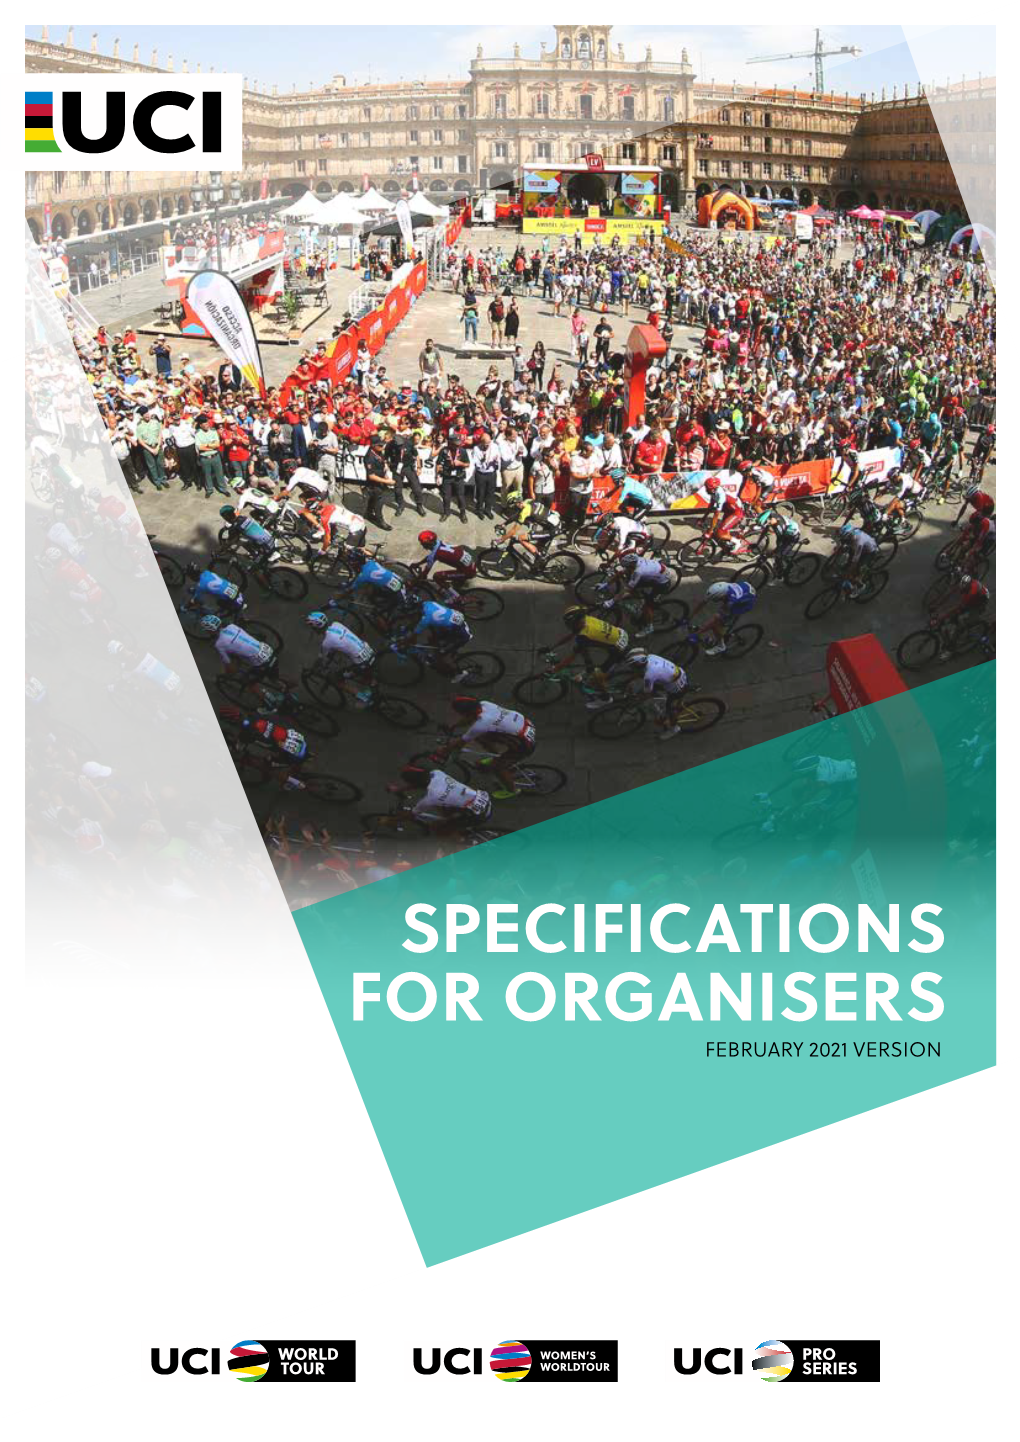 Specifications for Organisers